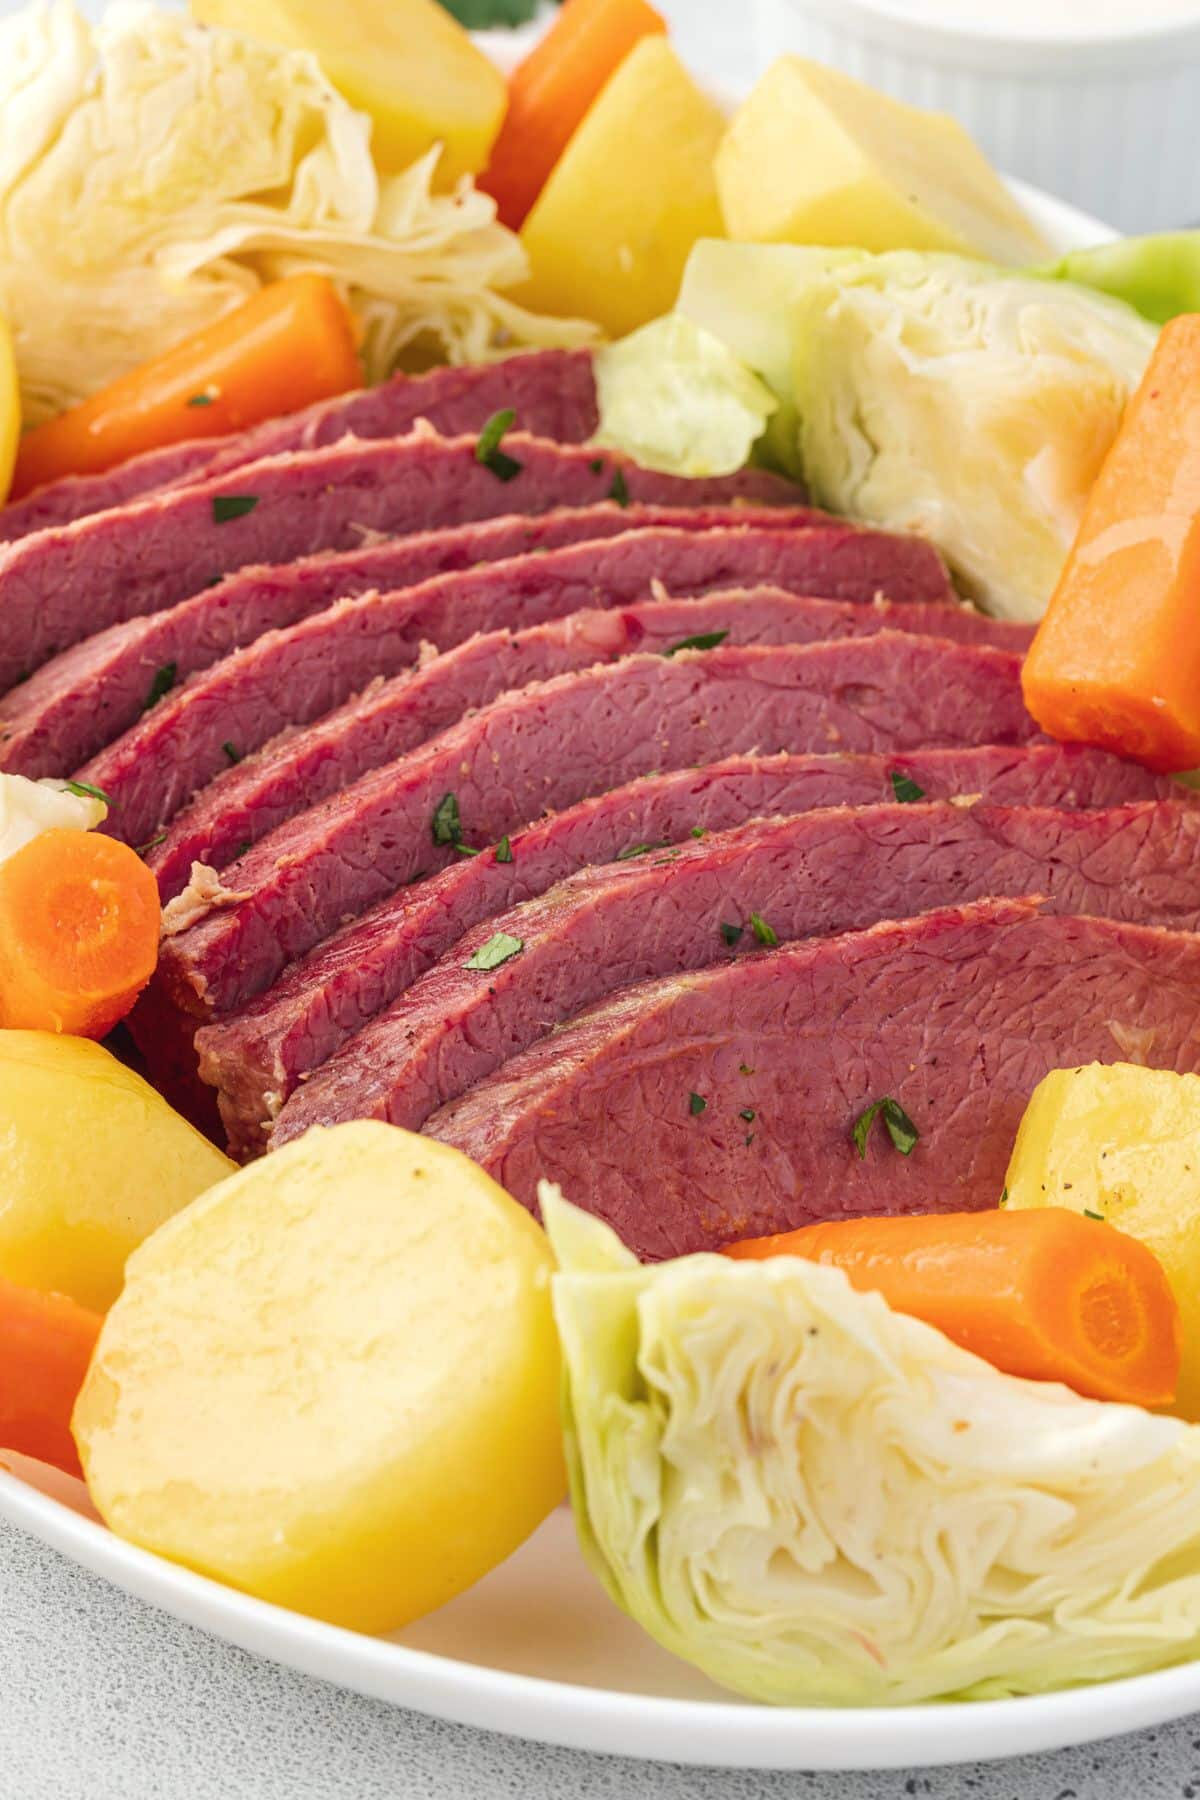 Bright pink slices of corned beef on a platter with yellow potatoes, cooked carrots, and cabbage wedges.